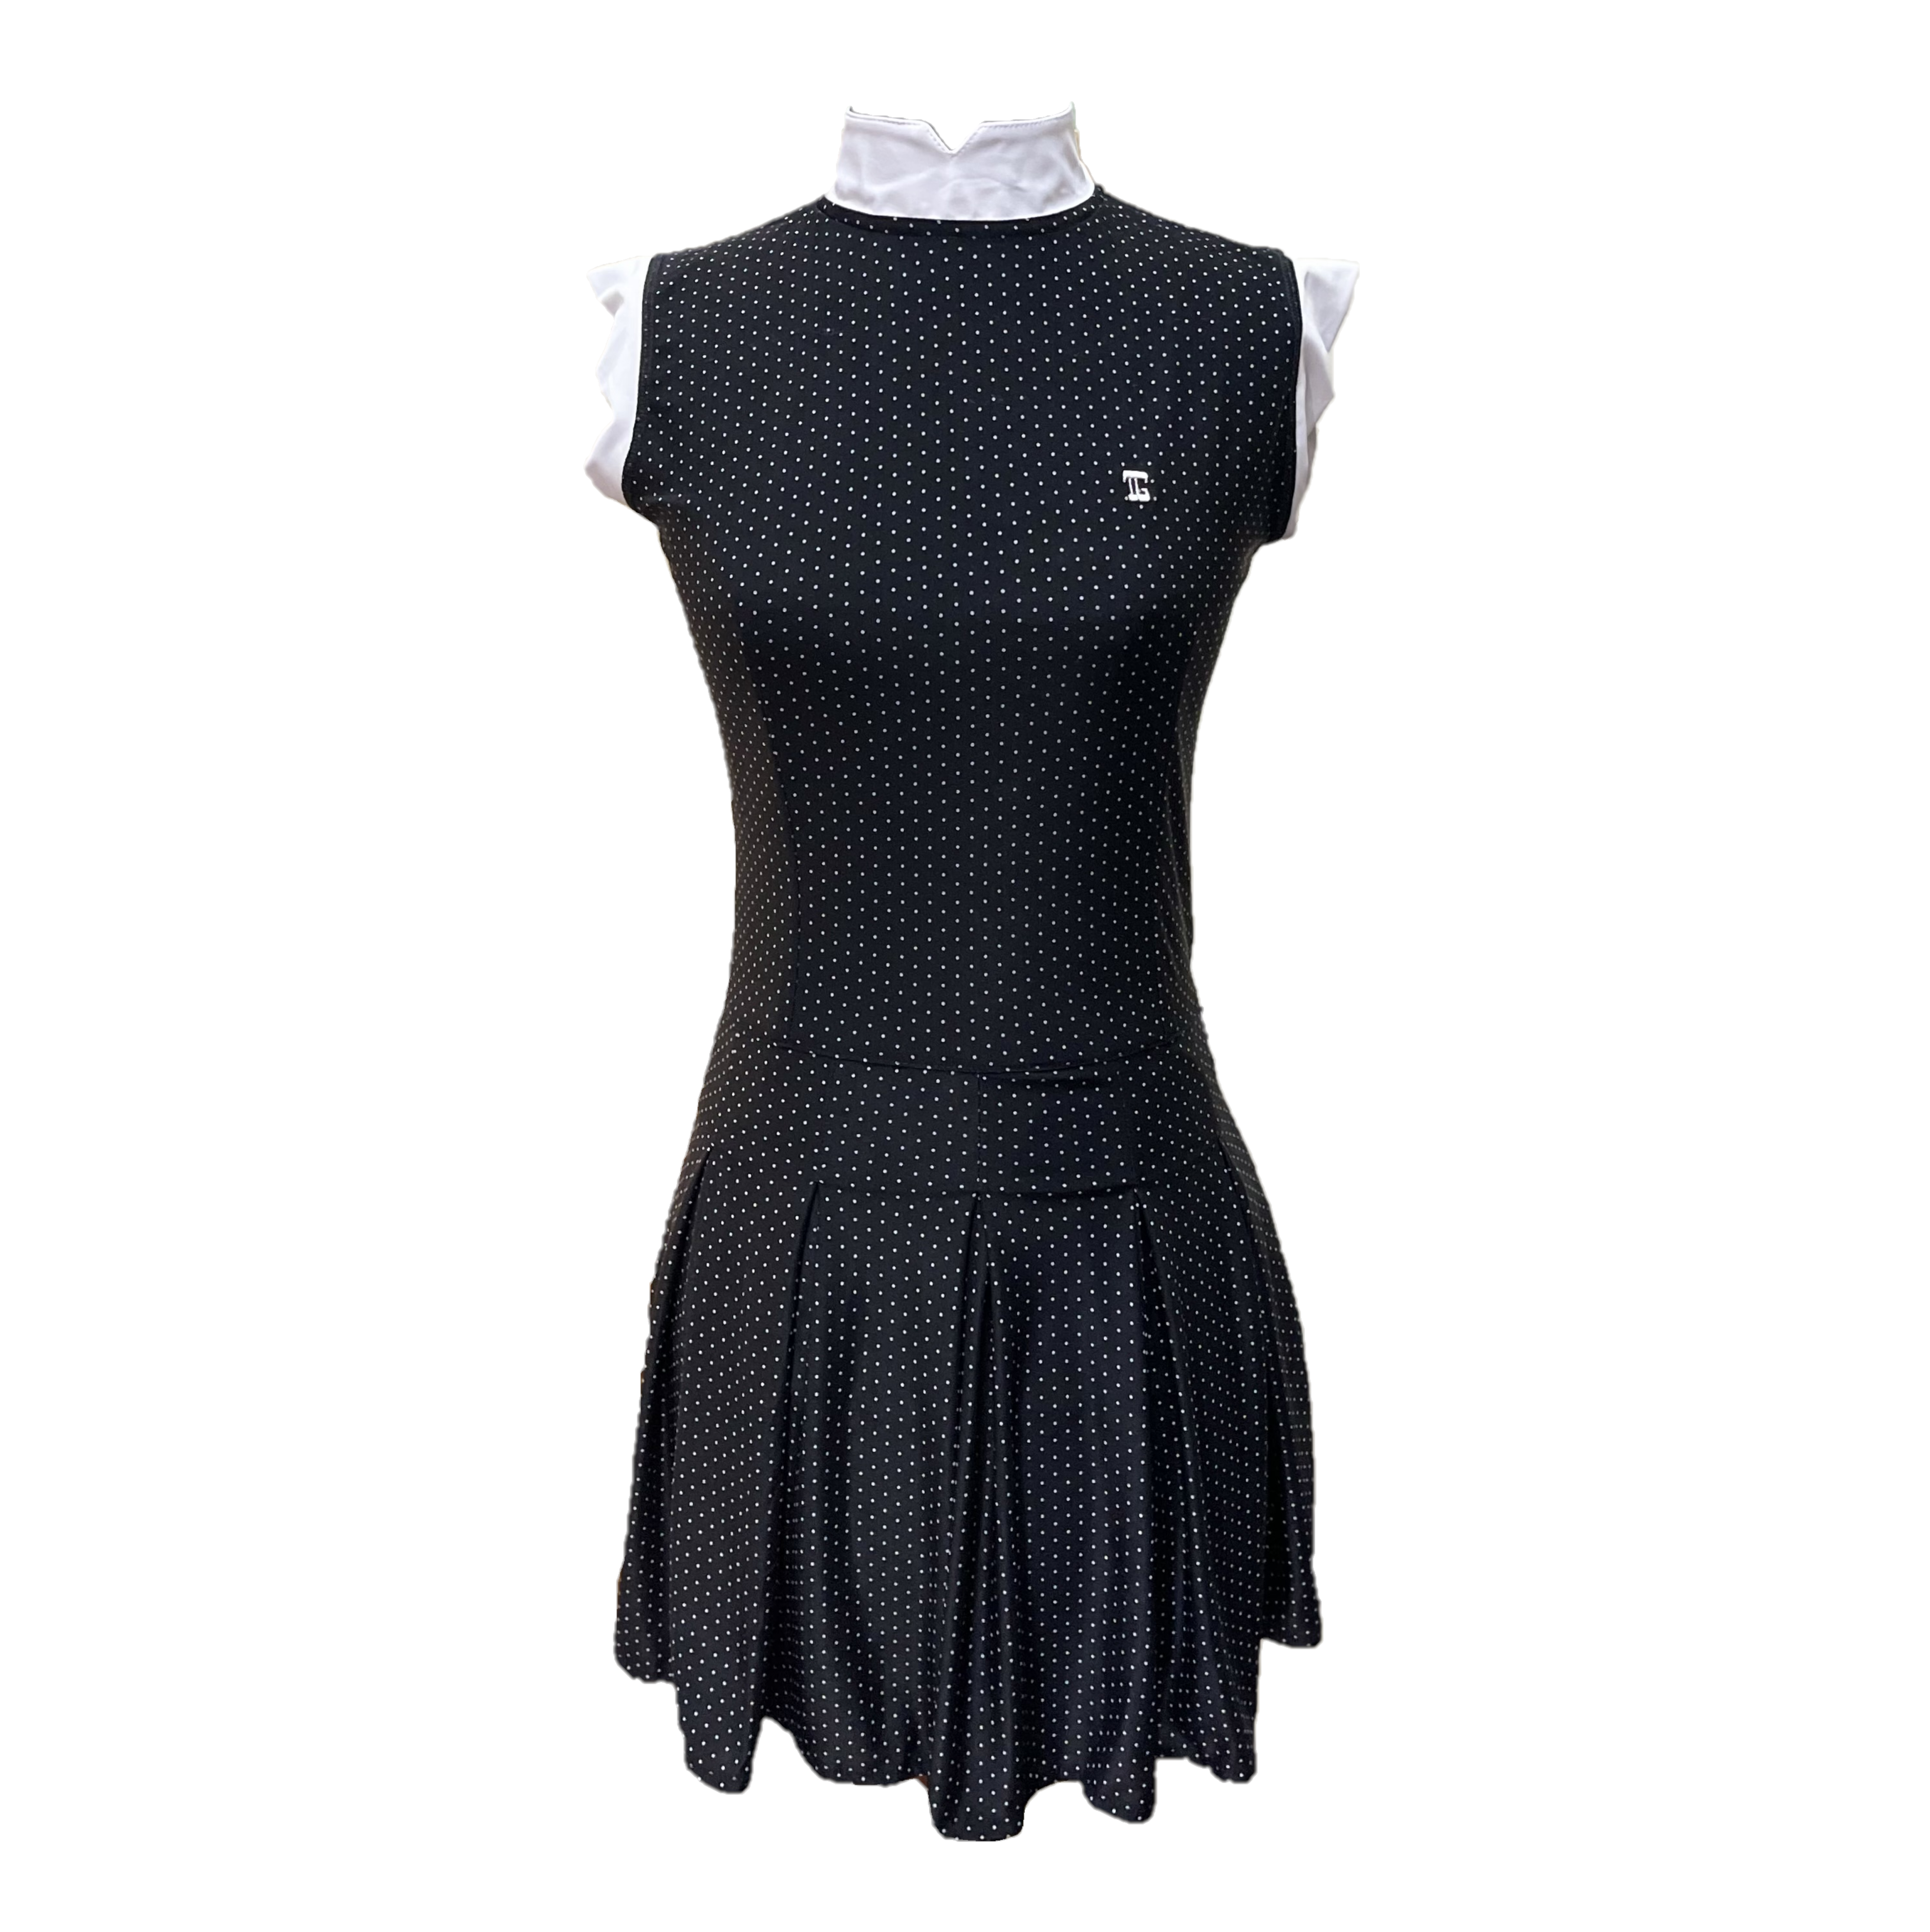 GD-028B || Golf Dress Soft Feel Black Short Sleeve Mandarin Neck with White Micro Polka Dots White Collar and Sleeve Trim 1 Side Pockets 1/3 Lower Pleated / Swing Section